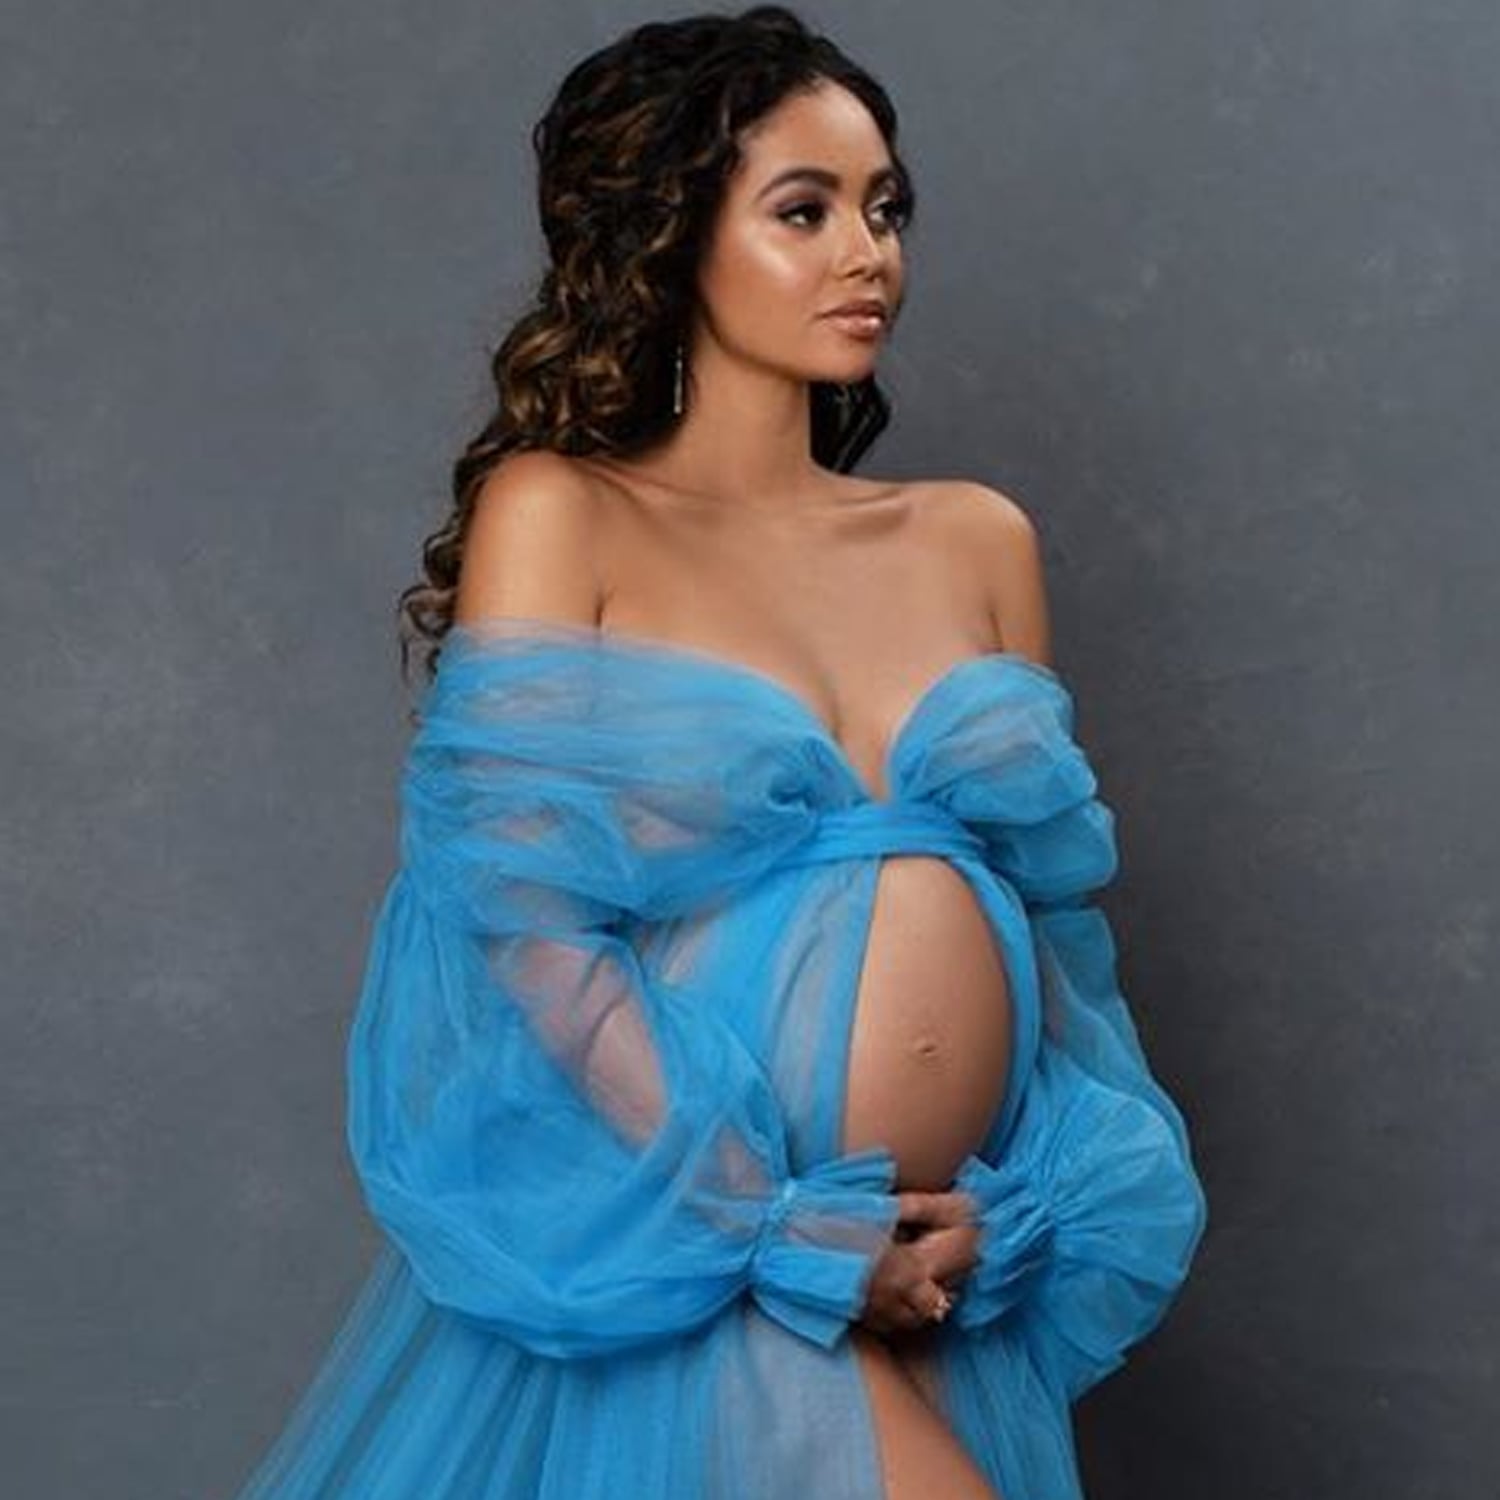 Michael Kopech, who dumped his then pregnant Riversdale actress wife  Vanessa Morgan, now has a pregnant new girlfriend playing stepdaddy to her  kid